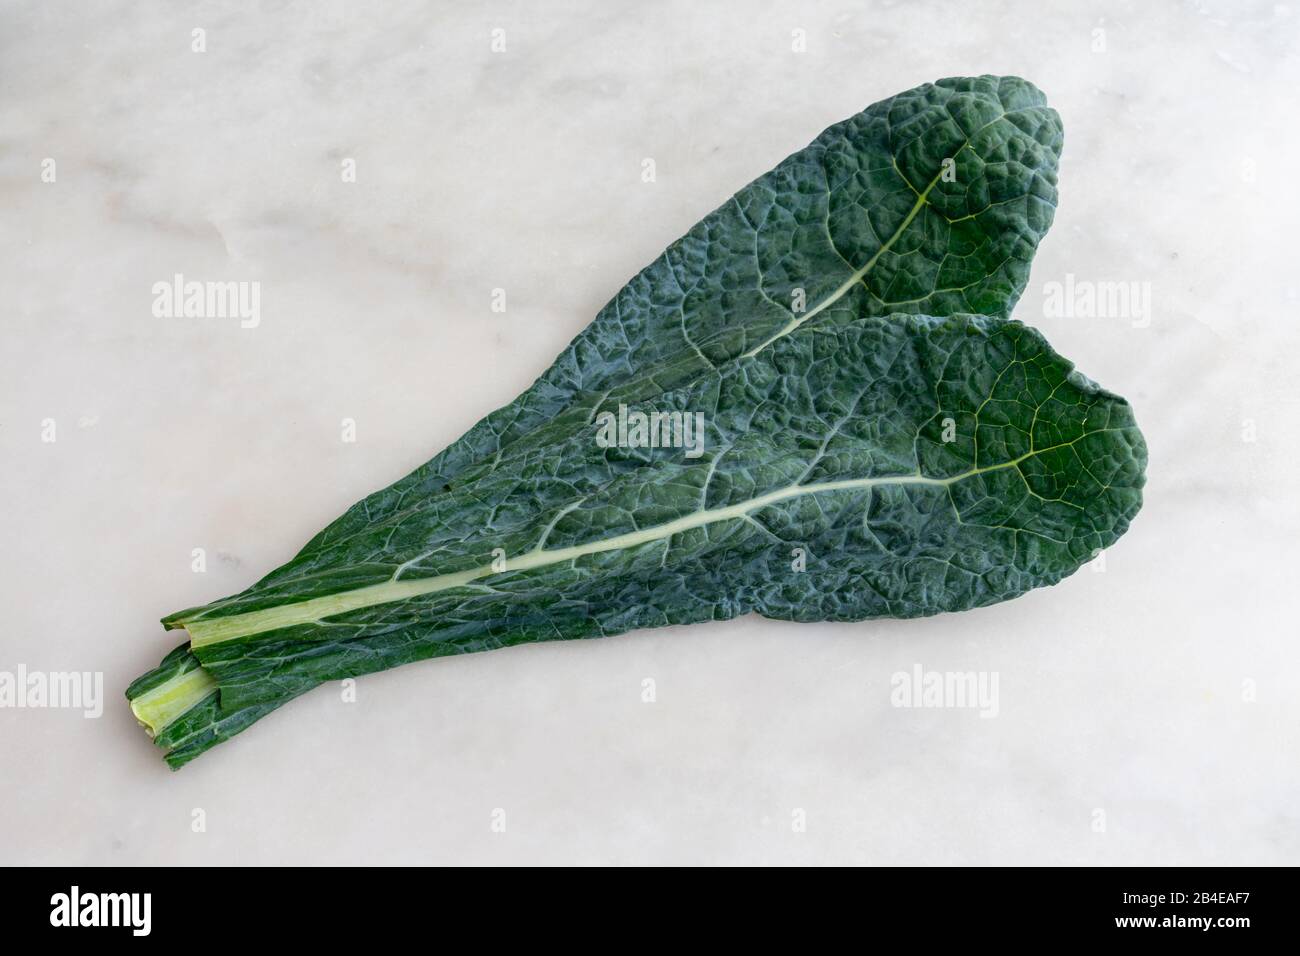 Lacinato Kale Leaves on White Marble Background: A group of fresh dinosaur kale leaves on a white marble table Stock Photo